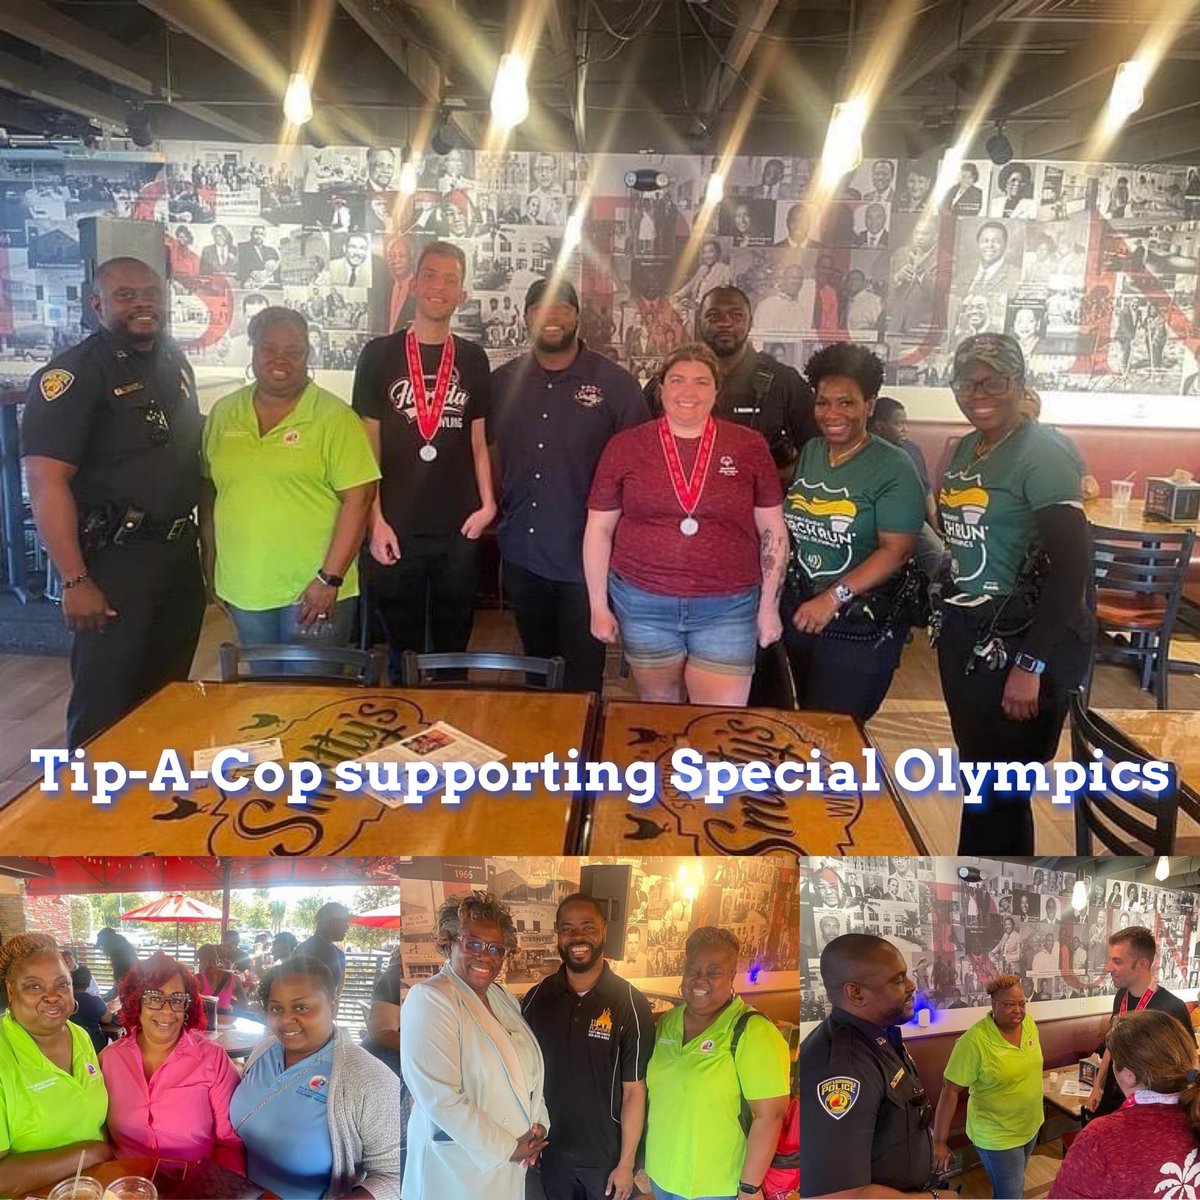 Thank you @FTLCityNews Vice Mayor Pamela Beasley-Pittman for your unwavering support of law enforcement. We appreciate you! 

#TipACop #FtLFOPConnectingWhileProtecting